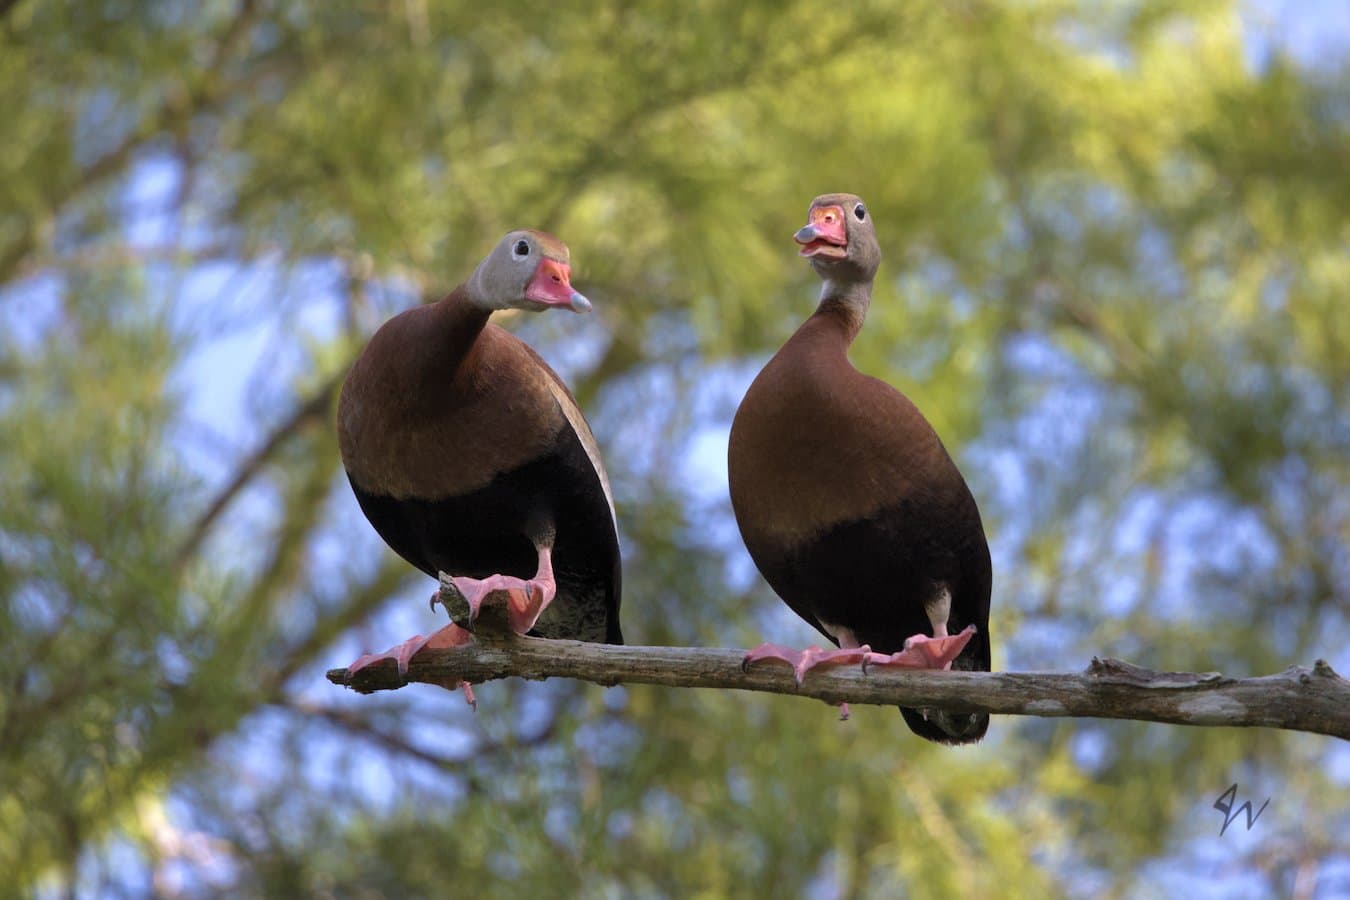 Two Black-bellied Whistling Ducks perched on branch.